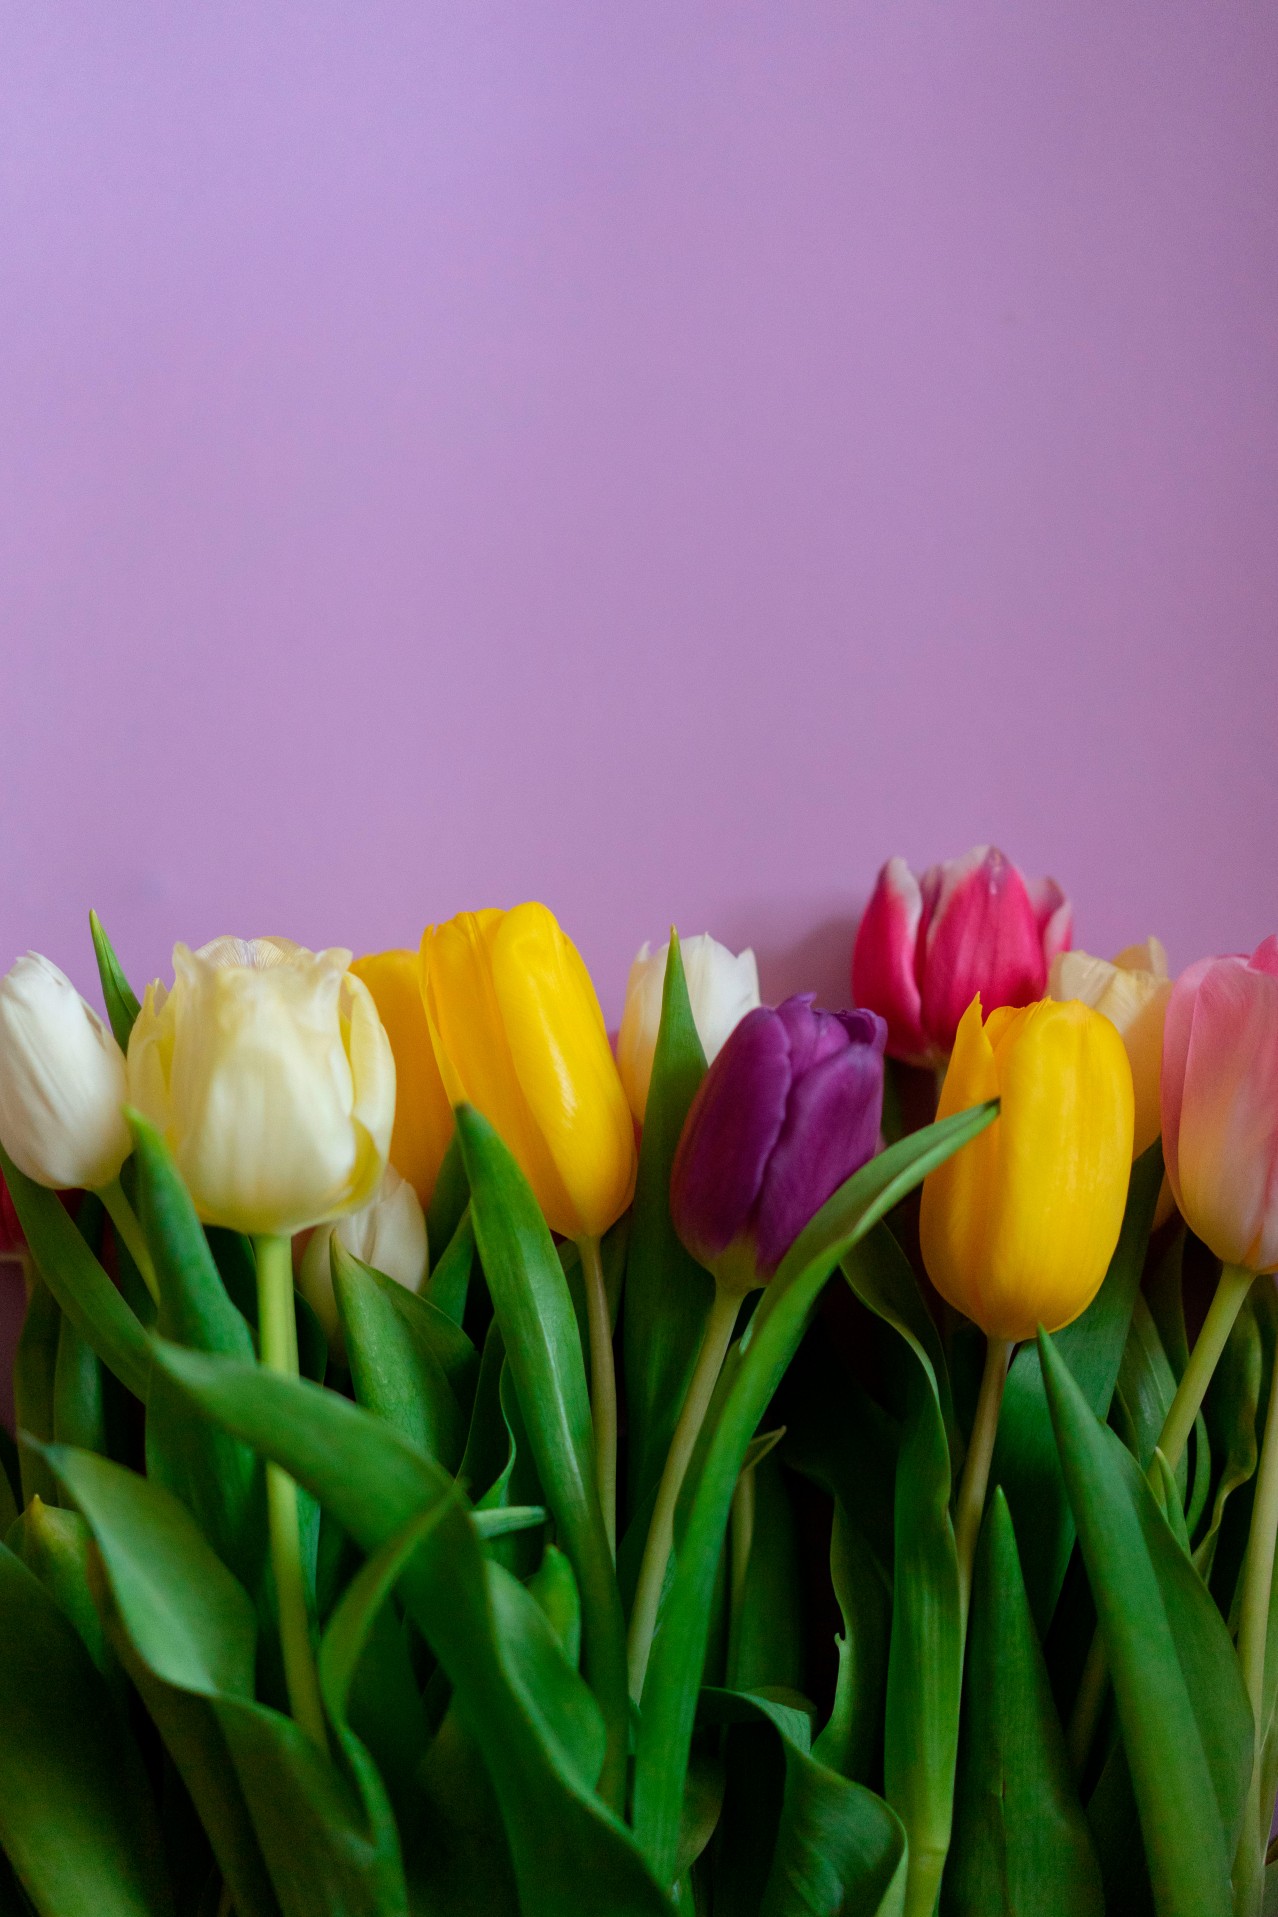 Colored Tulips on a Lilac Background